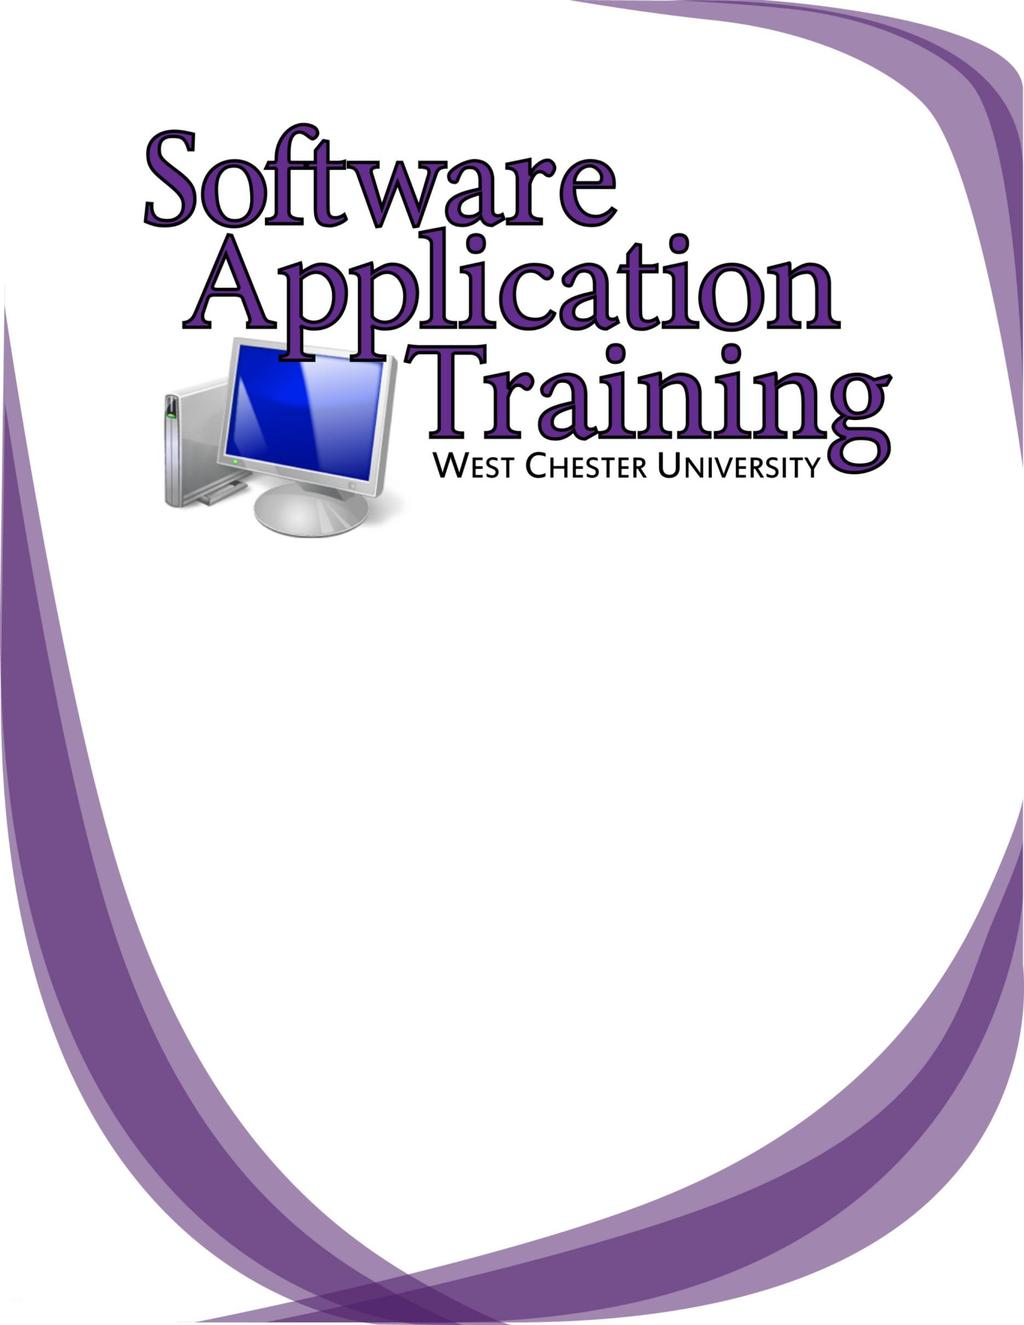 Introduction to Qualtrics Copyright 2014, Software Application Training, West Chester University.